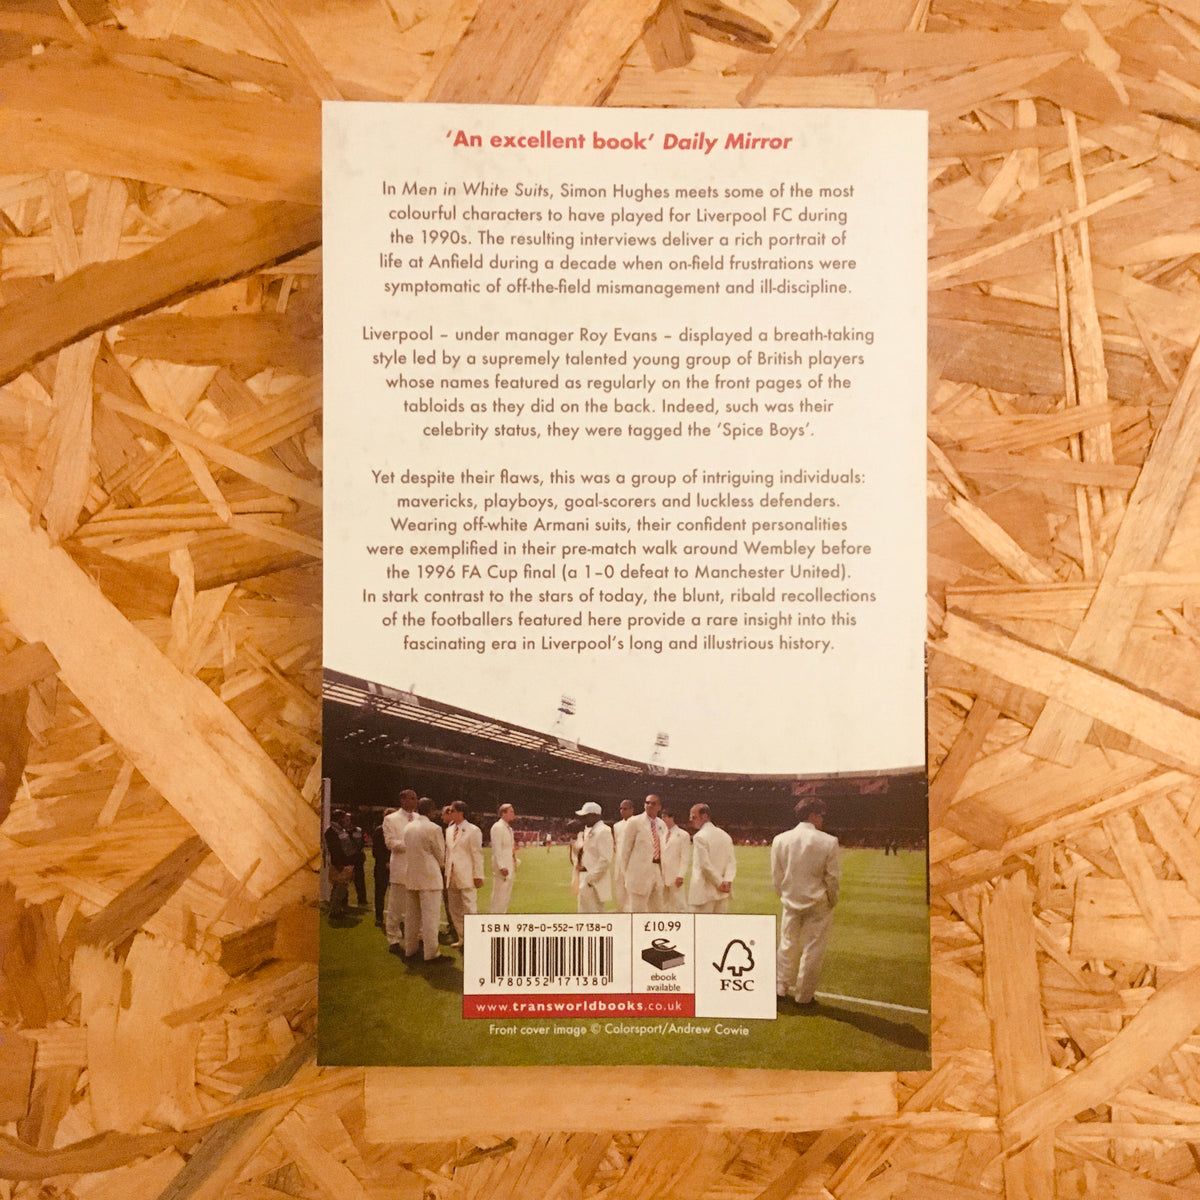 𝐑𝐄𝐒𝐓𝐎𝐂𝐊 | MEN IN WHITE SUITS by @Simon_Hughes__ The fascinating inside story behind the decline of #LFC in the 1990s, as told by a host of influential characters associated with the team during this tumultuous period in the club's history. 🛒 stanchionbooks.com/products/men-i…